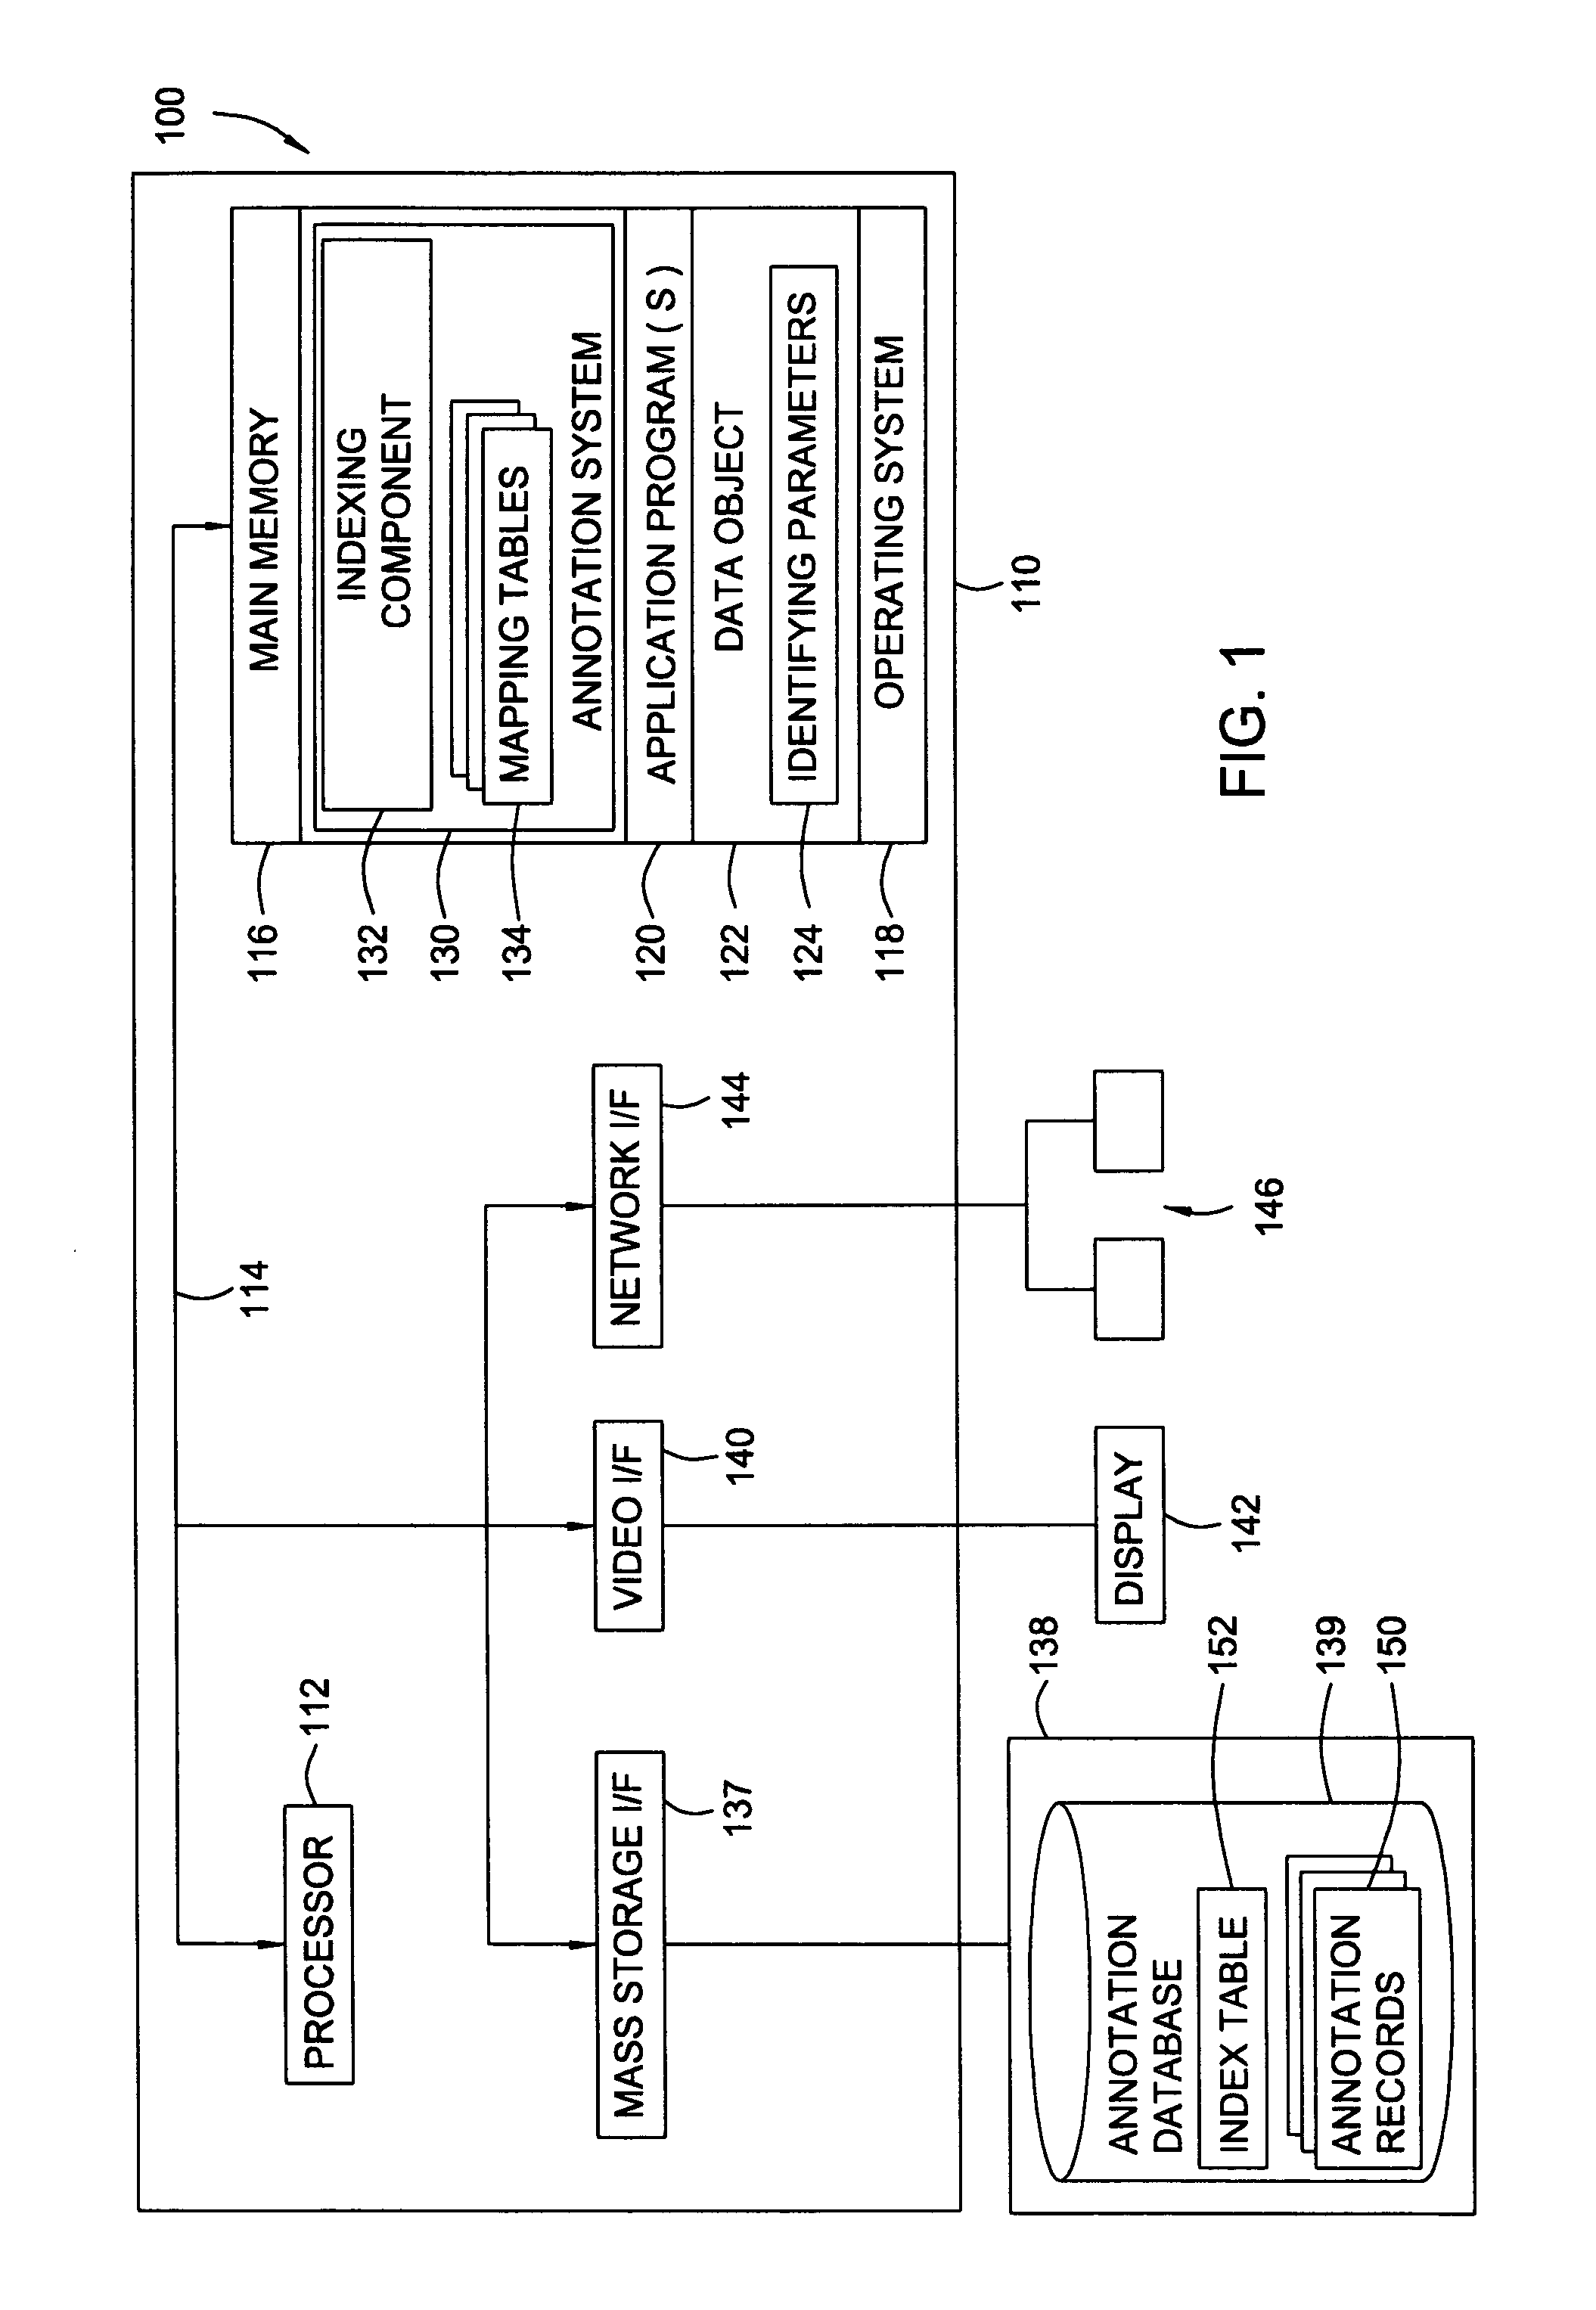 Heterogeneous multi-level extendable indexing for general purpose annotation systems